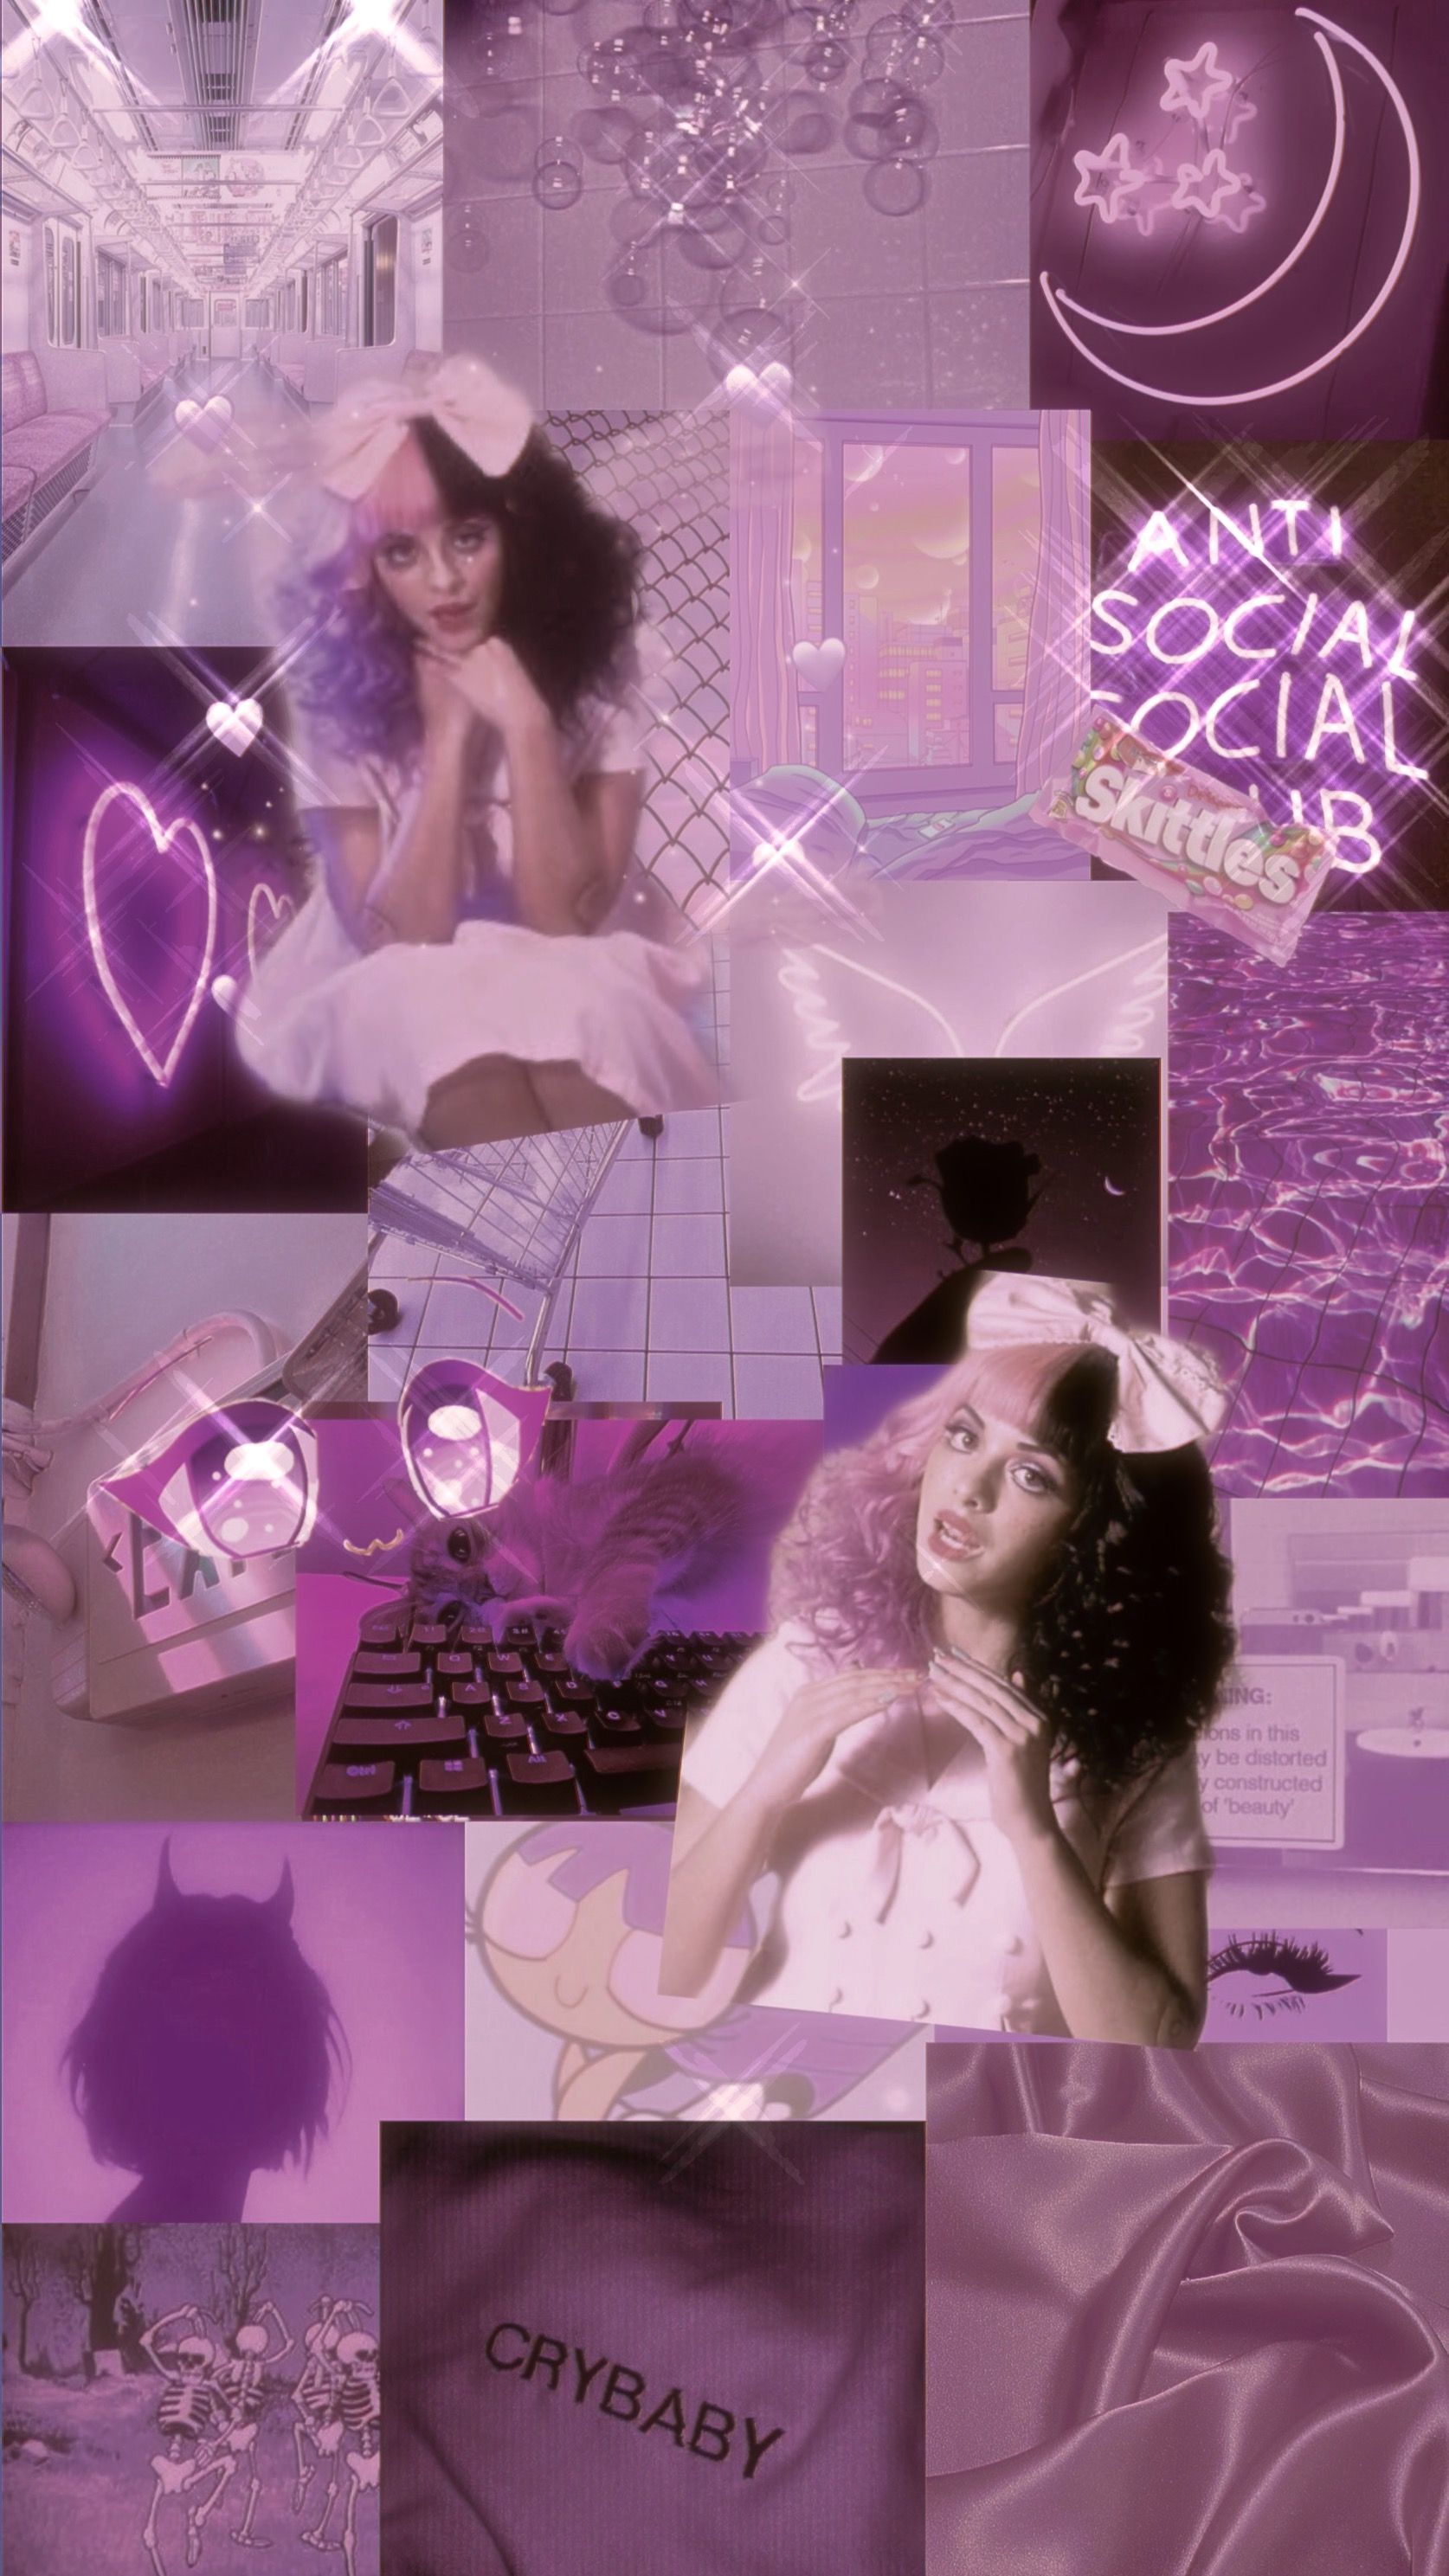 Another wallpaper u can steal. Dollhouse melanie, Melanie martinez anime, Melanie martinez